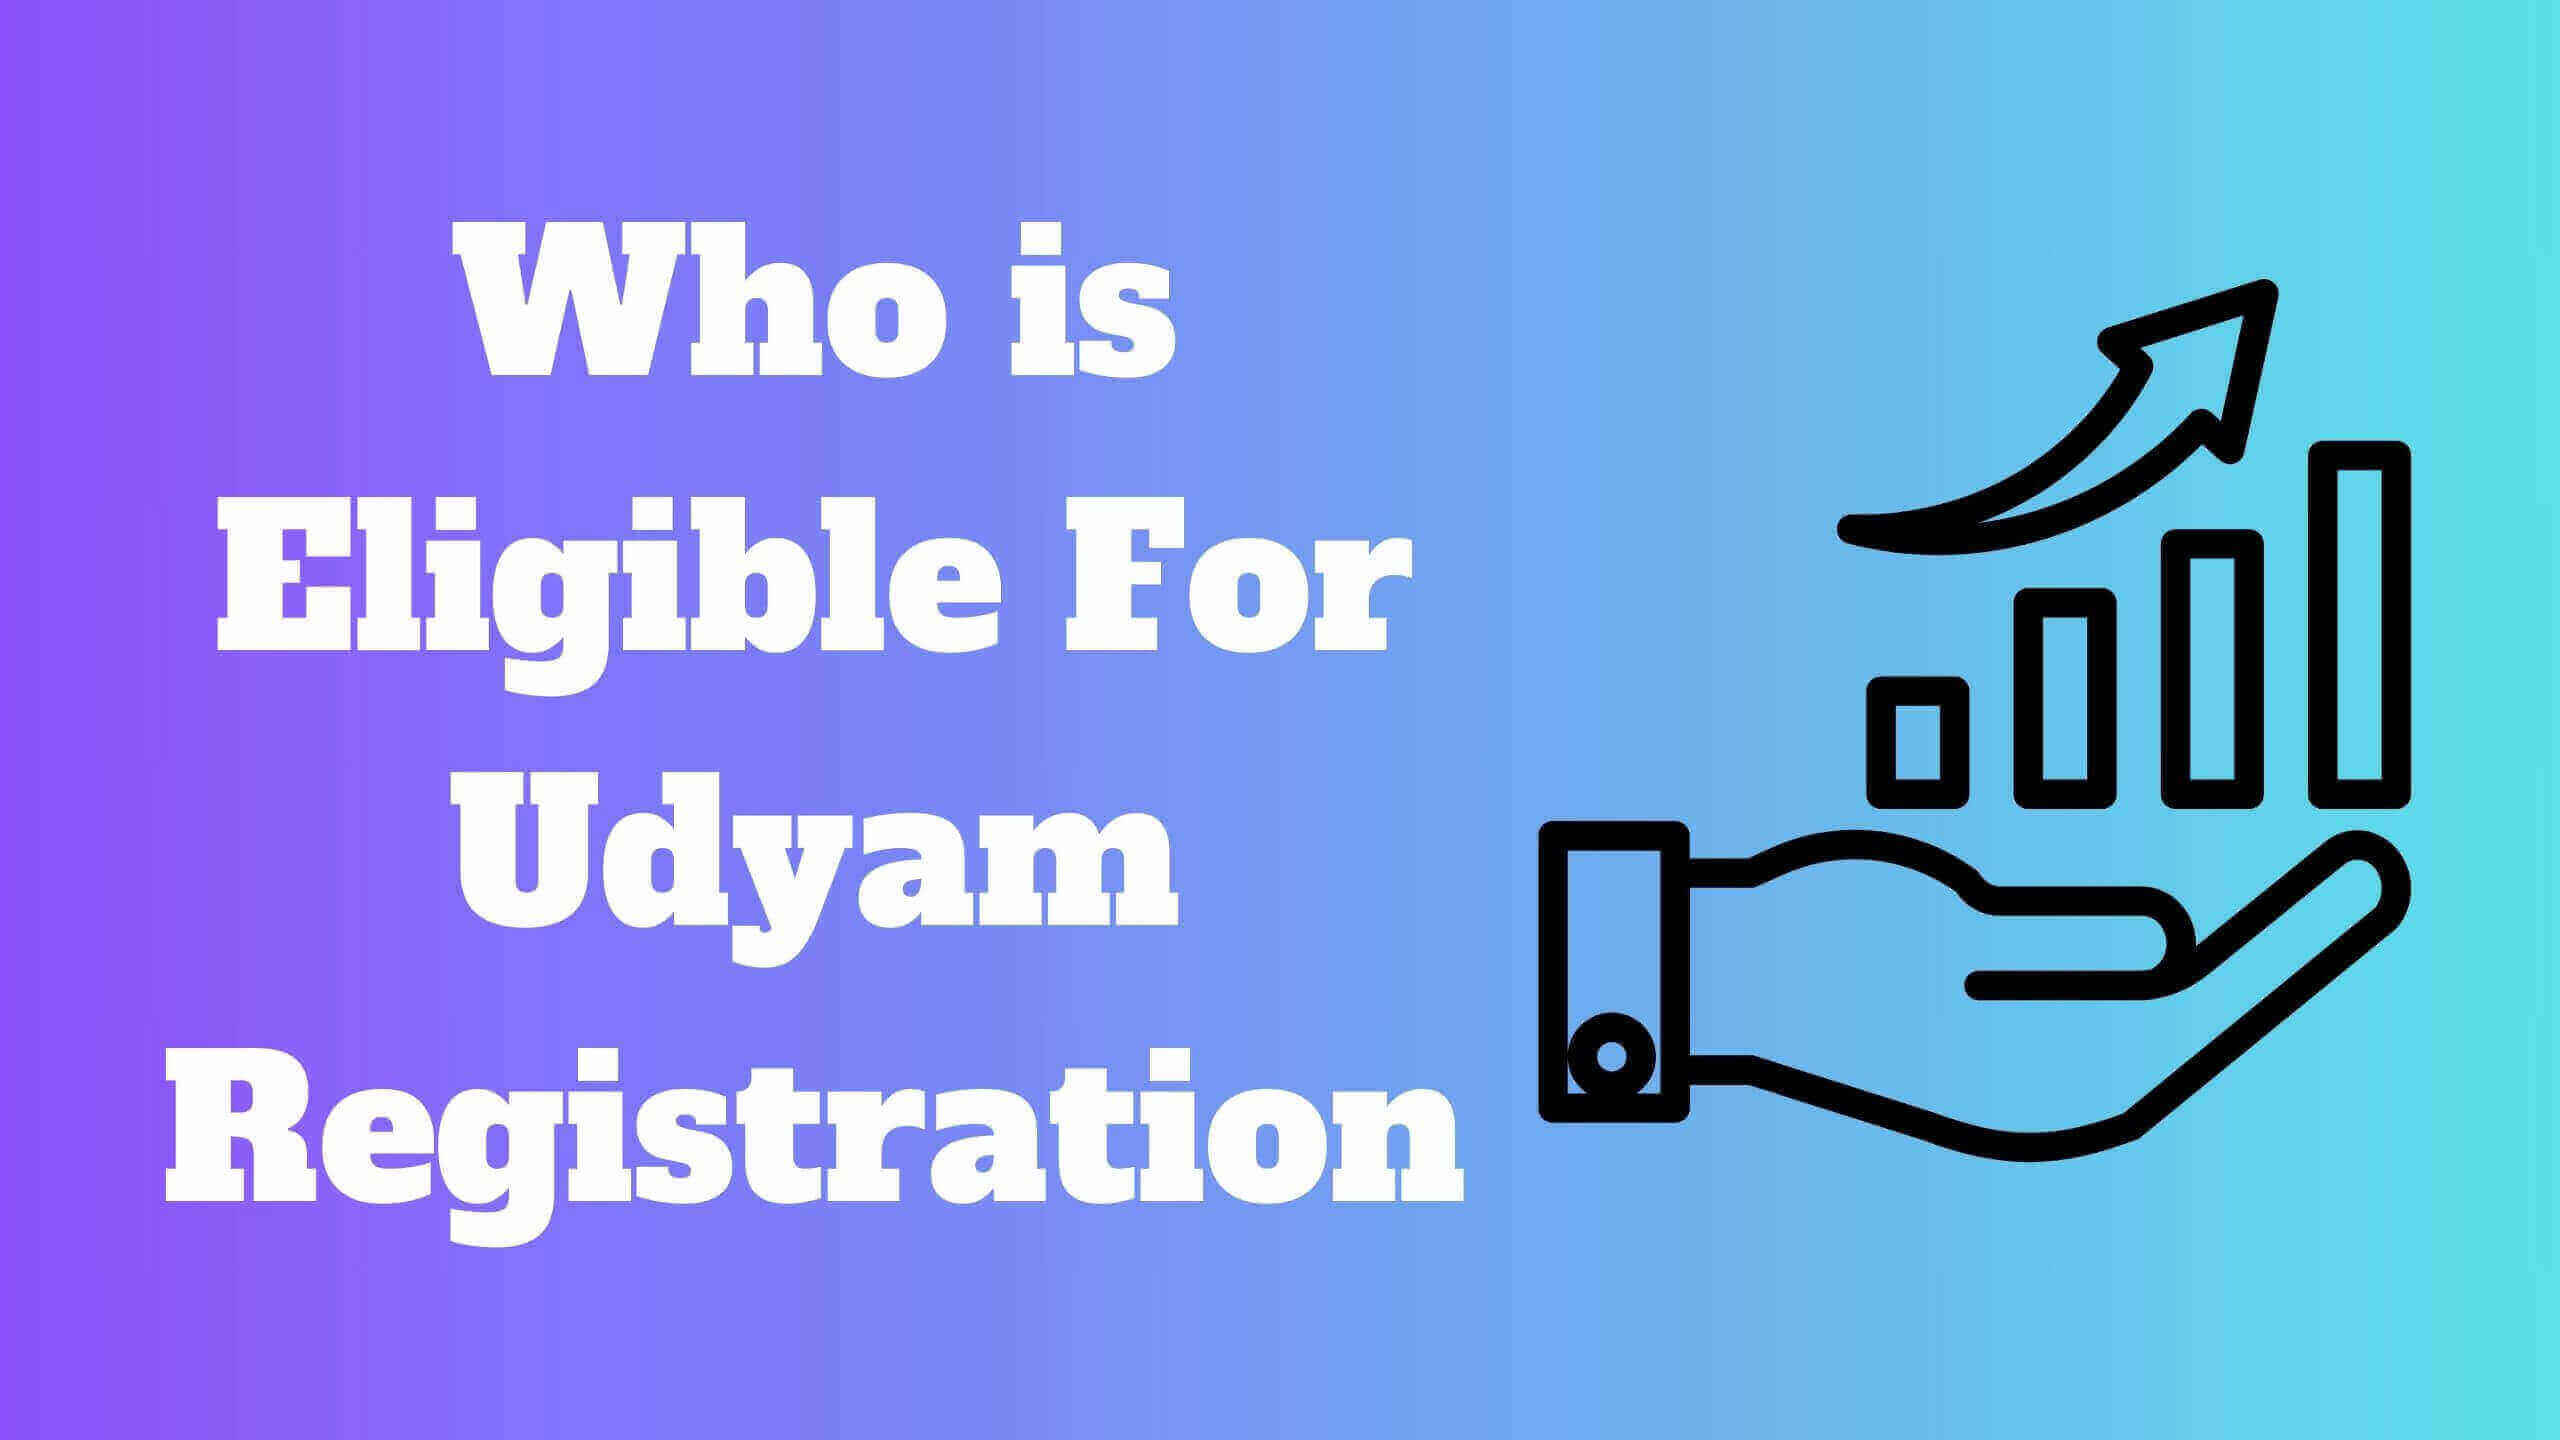 Who is Eligible for Udyam Registration